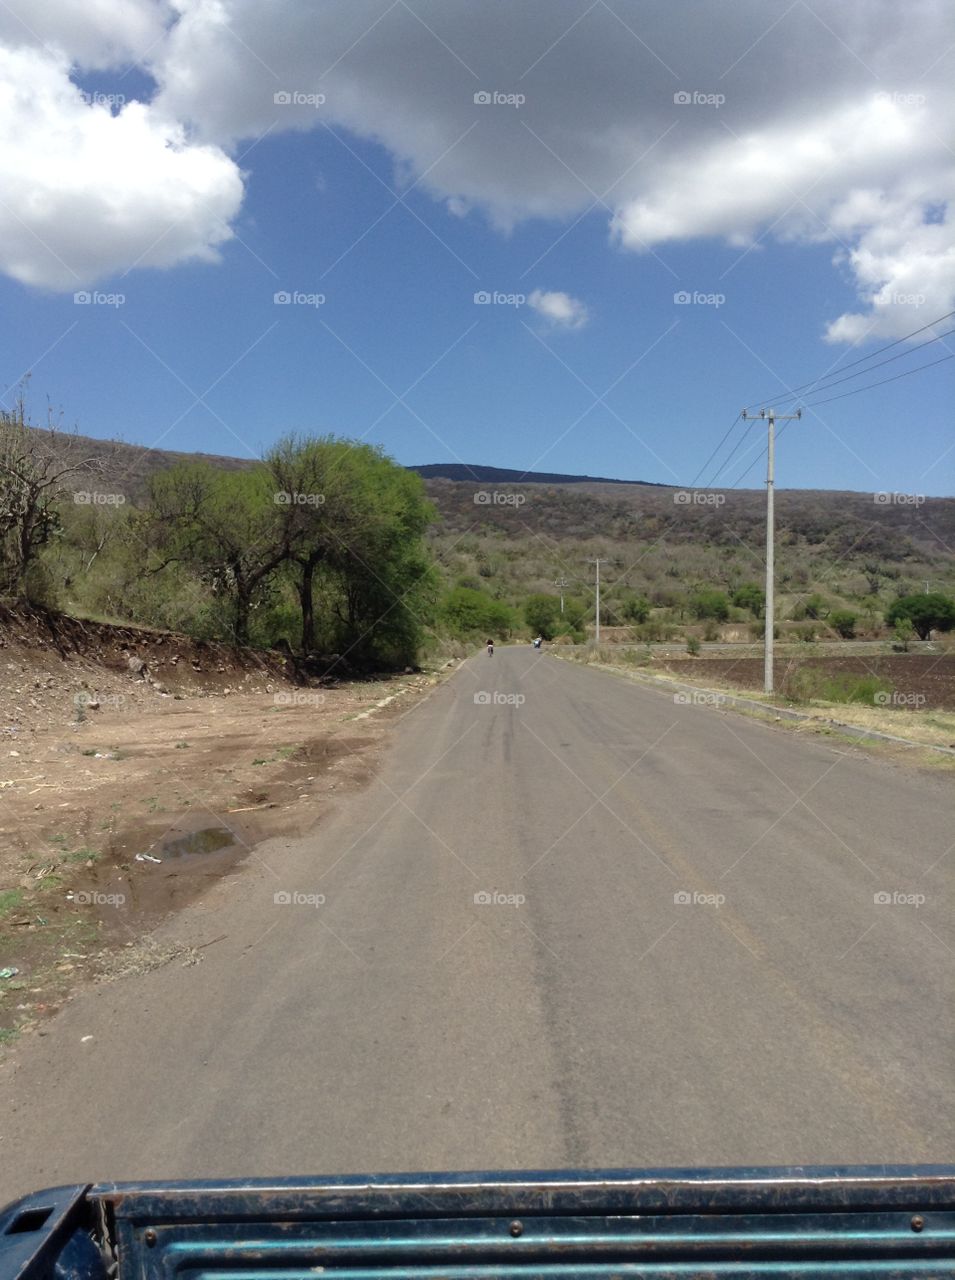 Roads in Mexico
